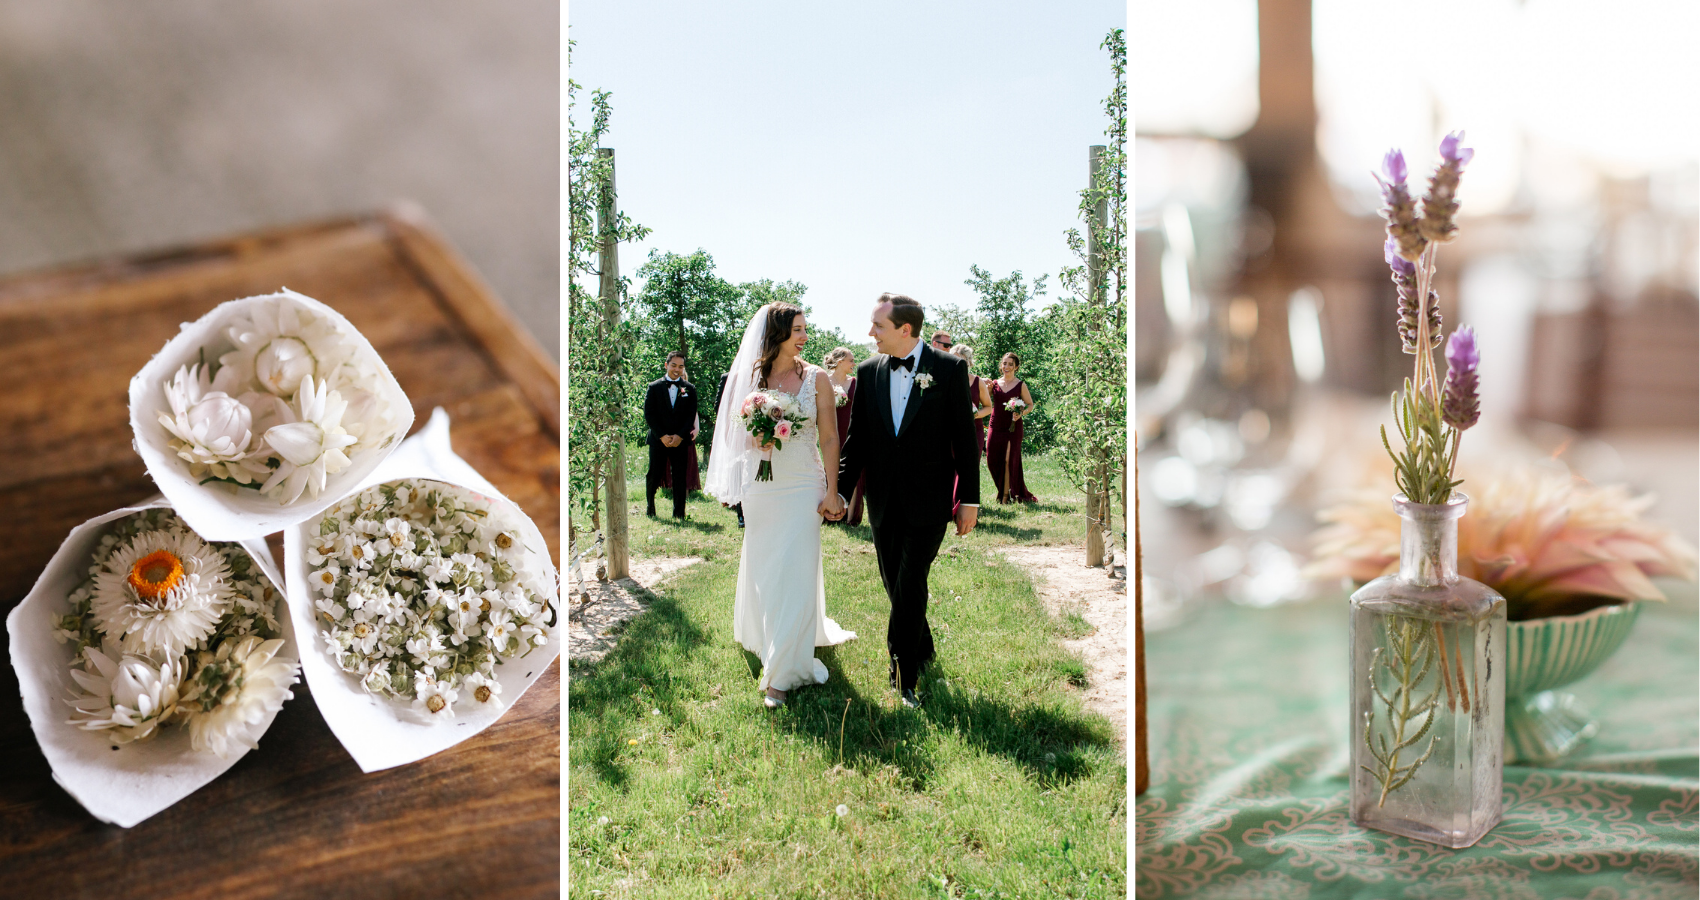 Blog Header For Maggie Sottero's Green Wedding Ideas Blog With A Photo Of A Sustainable Flower Send-Off, A Bride Wearing A Dress Called Aidan By Sottero And Midgley, And Thrifted Vase With Flower